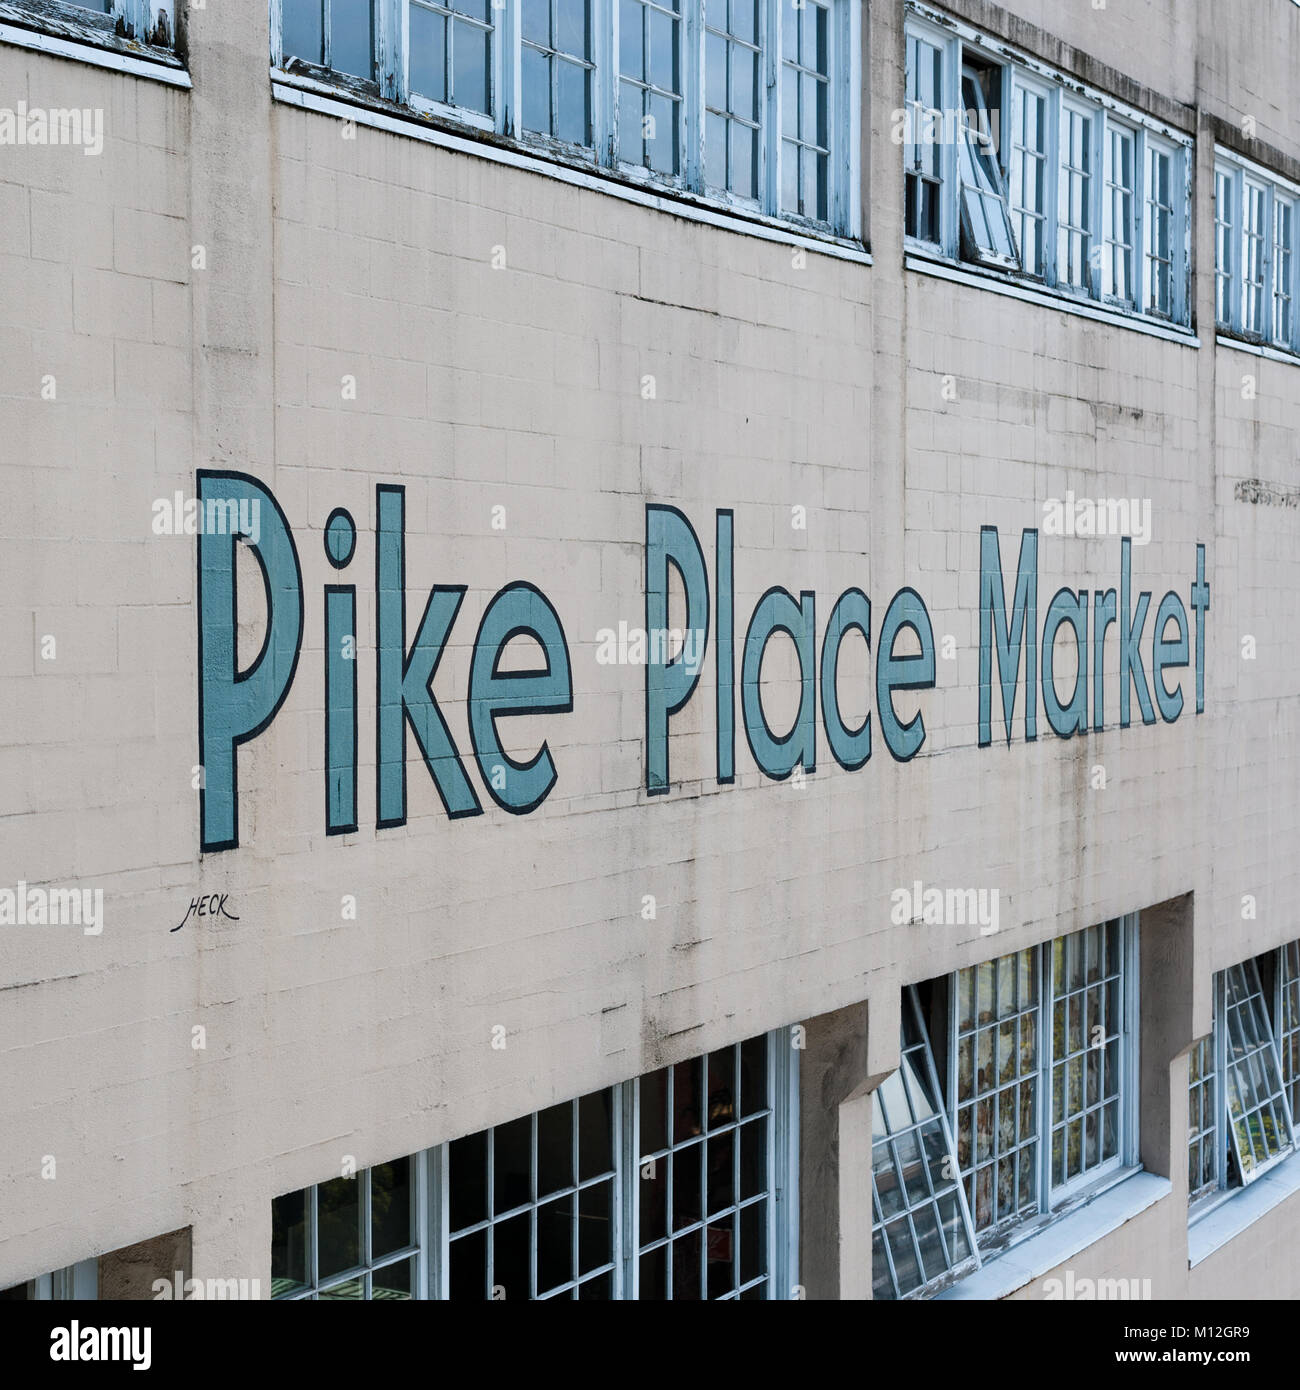 Pike Place Market signage on wall, Seattle Stock Photo